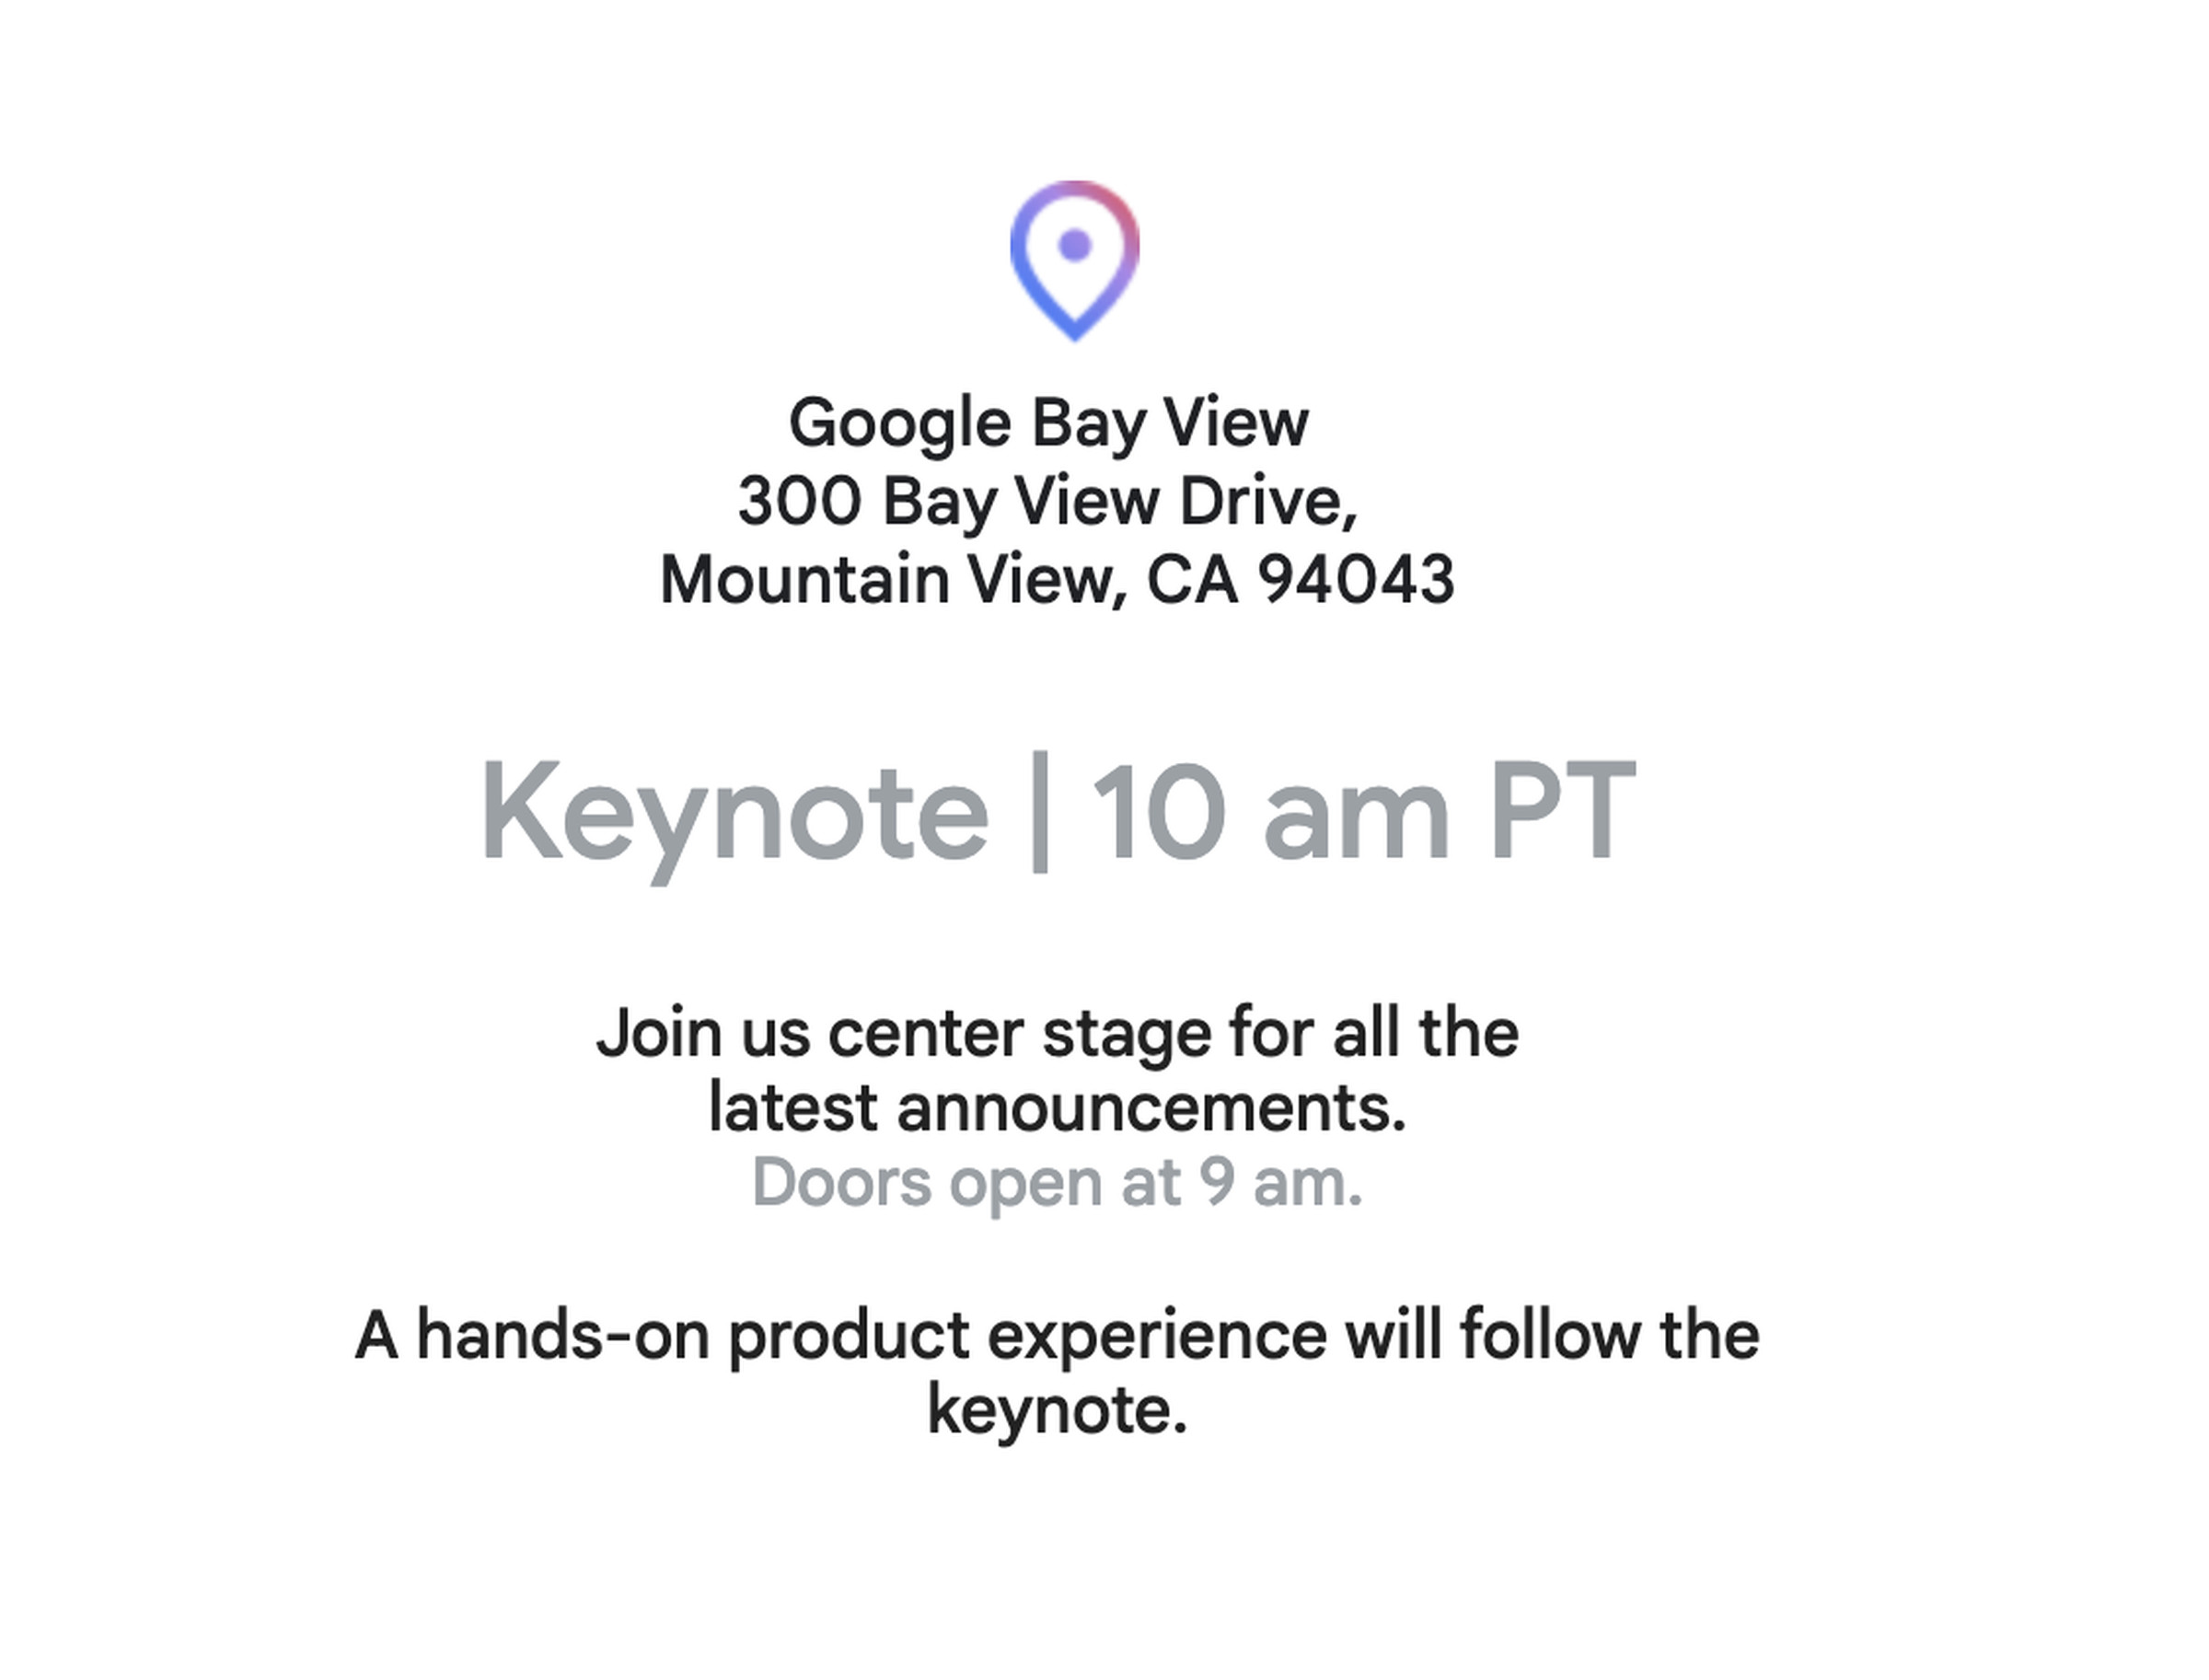 Made by Google event invitation with time and details